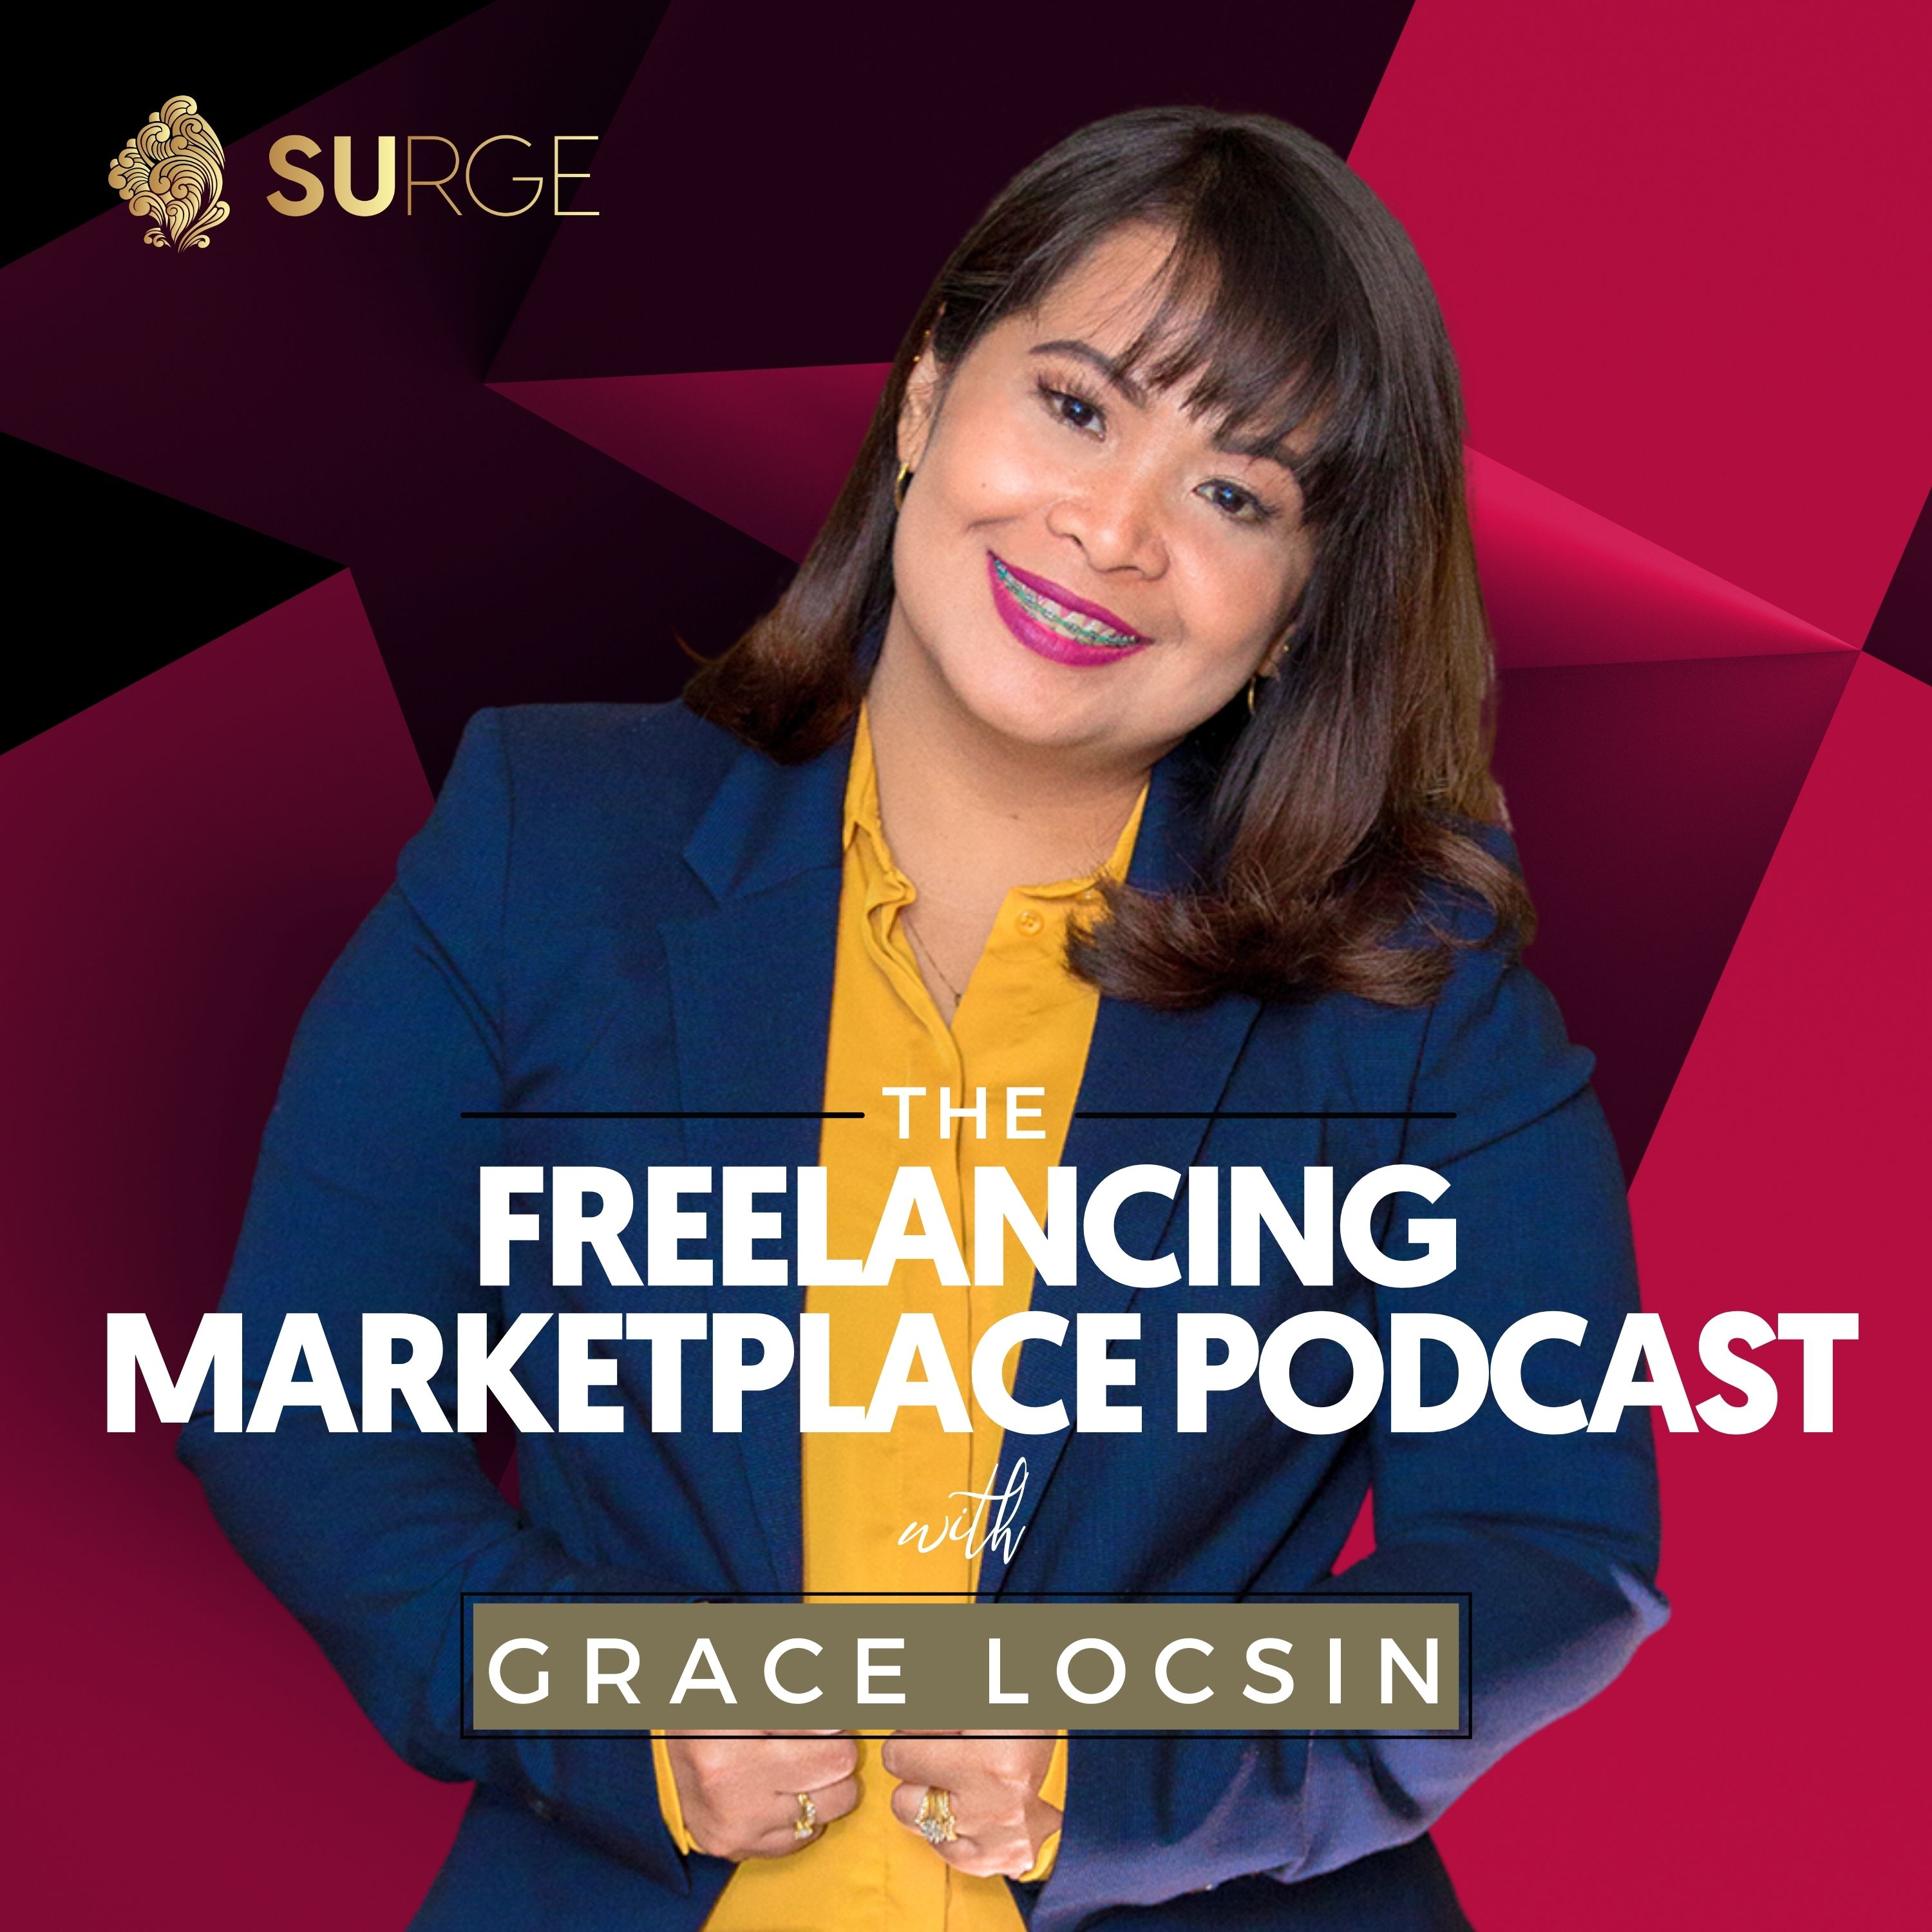 Artwork for podcast The Freelancing Marketplace Podcast